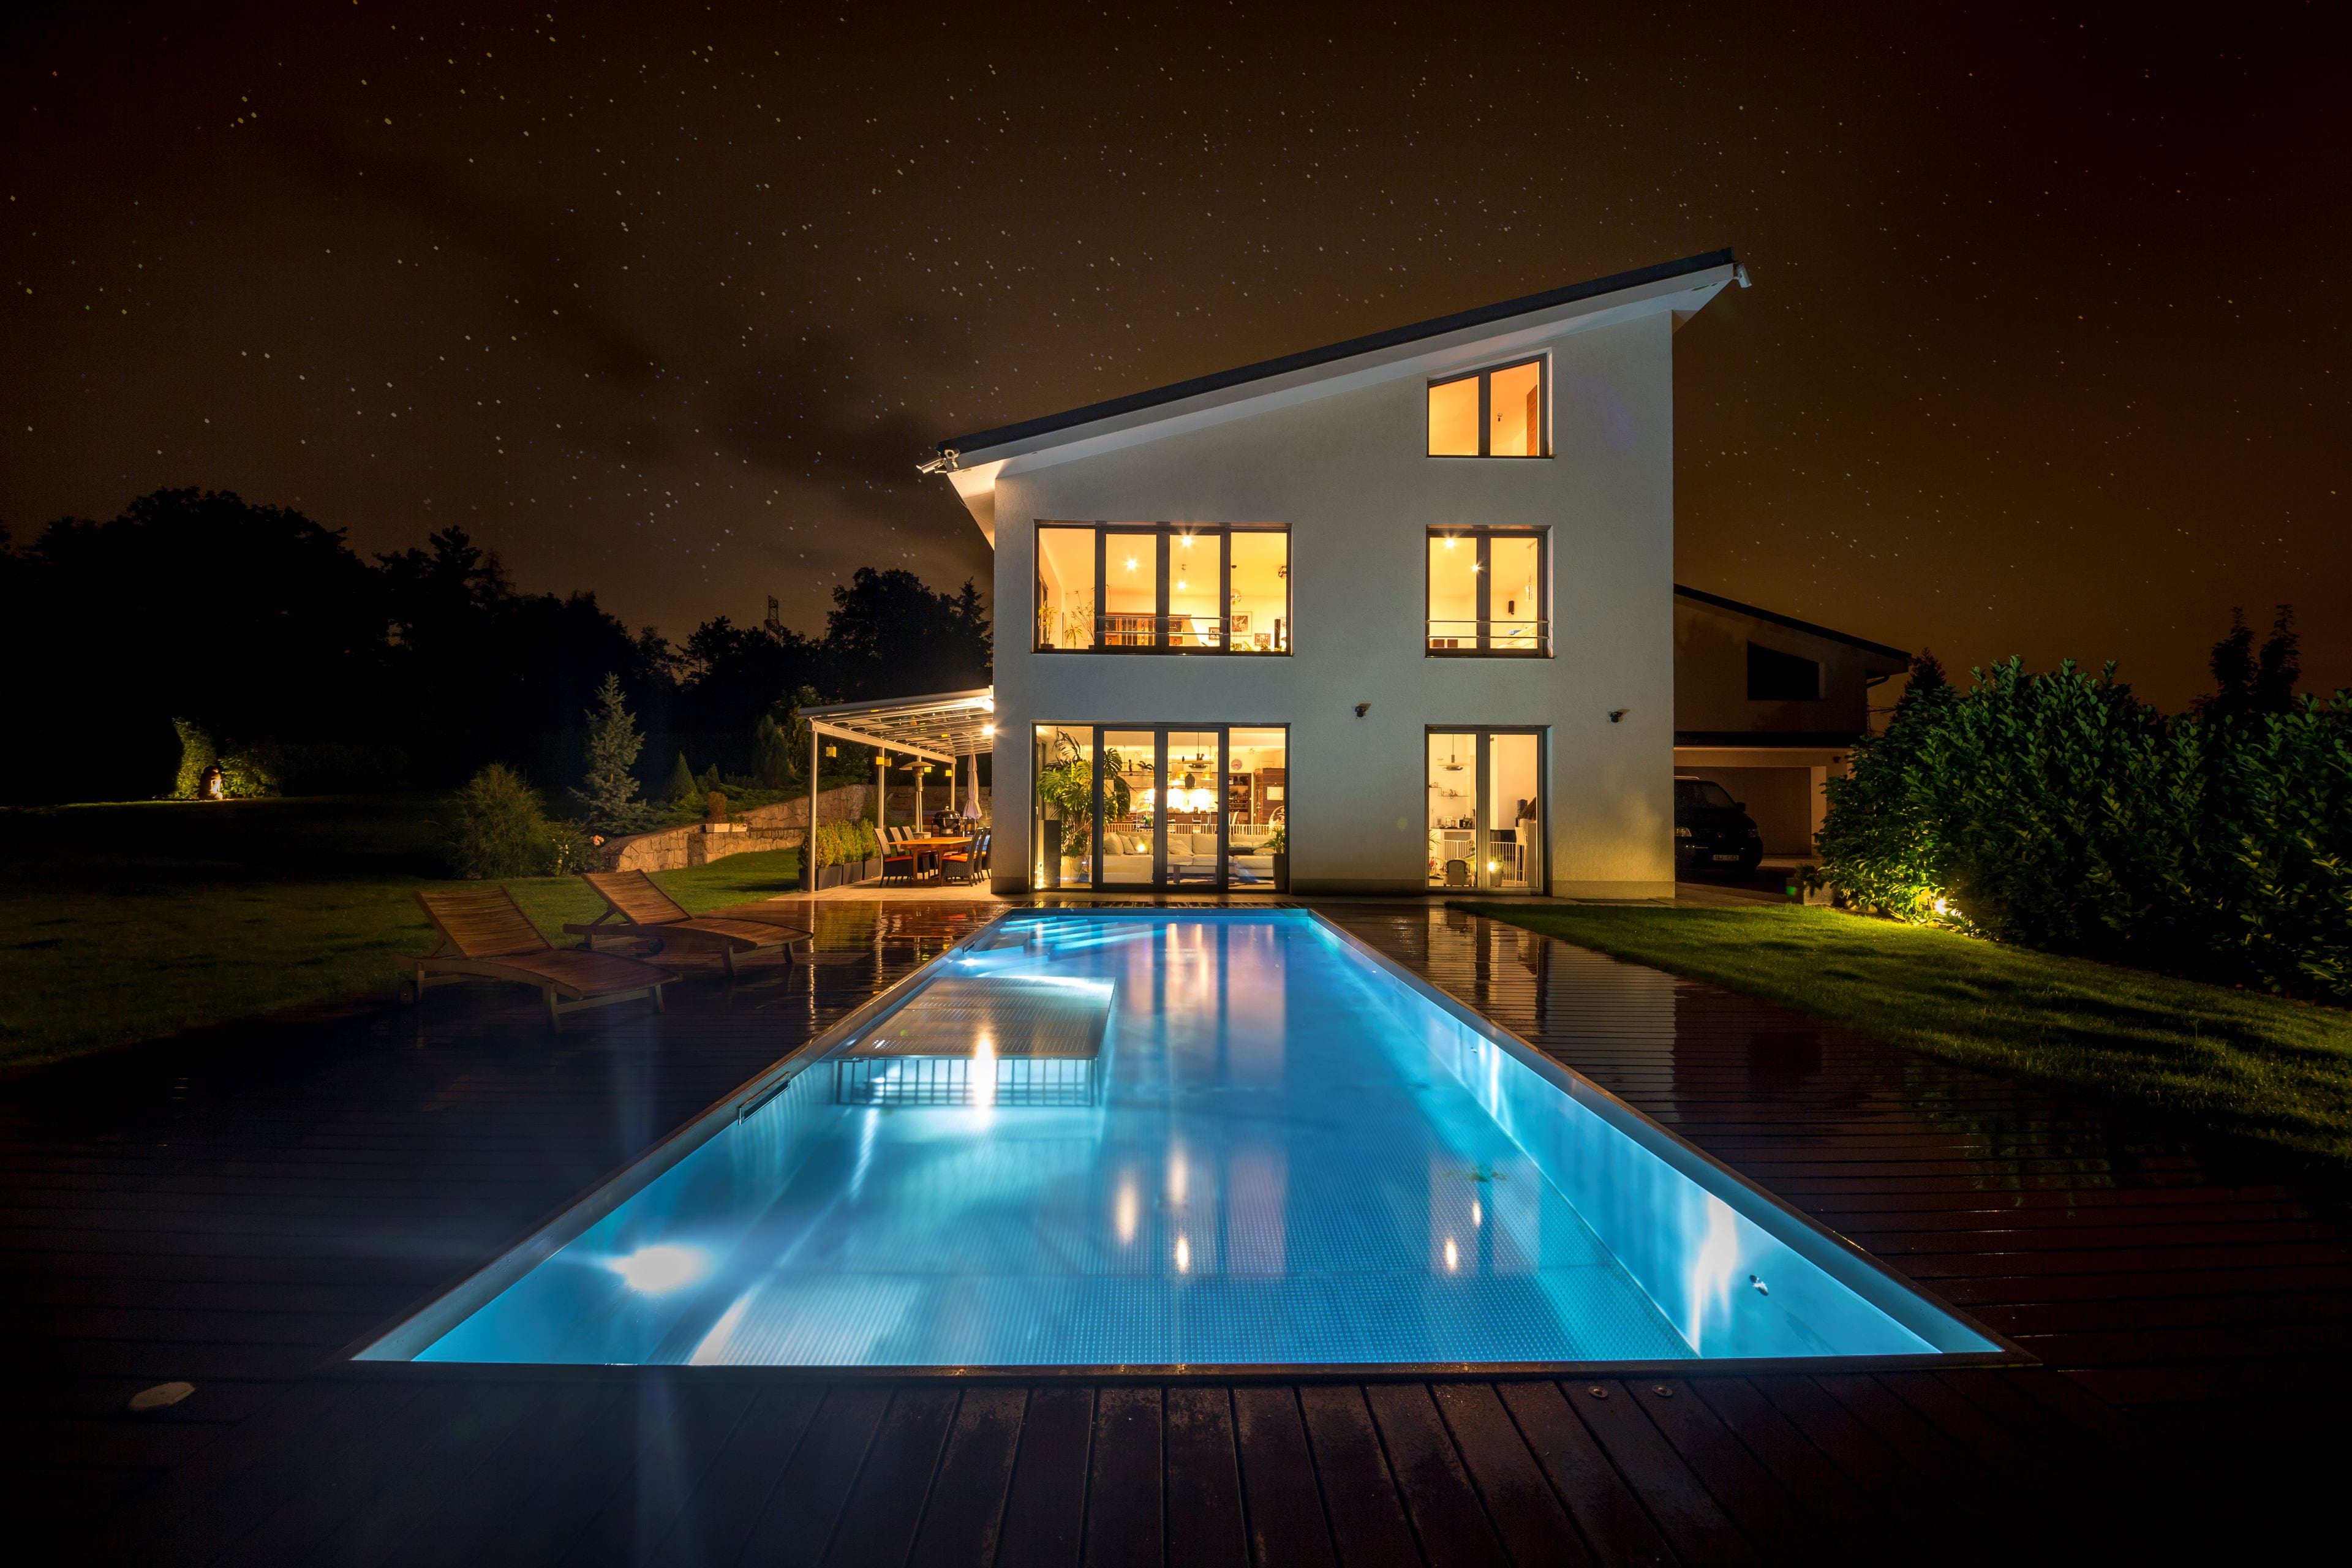 Pool Story: Realization of the IMAGINOX Stainless-Steel Pool!